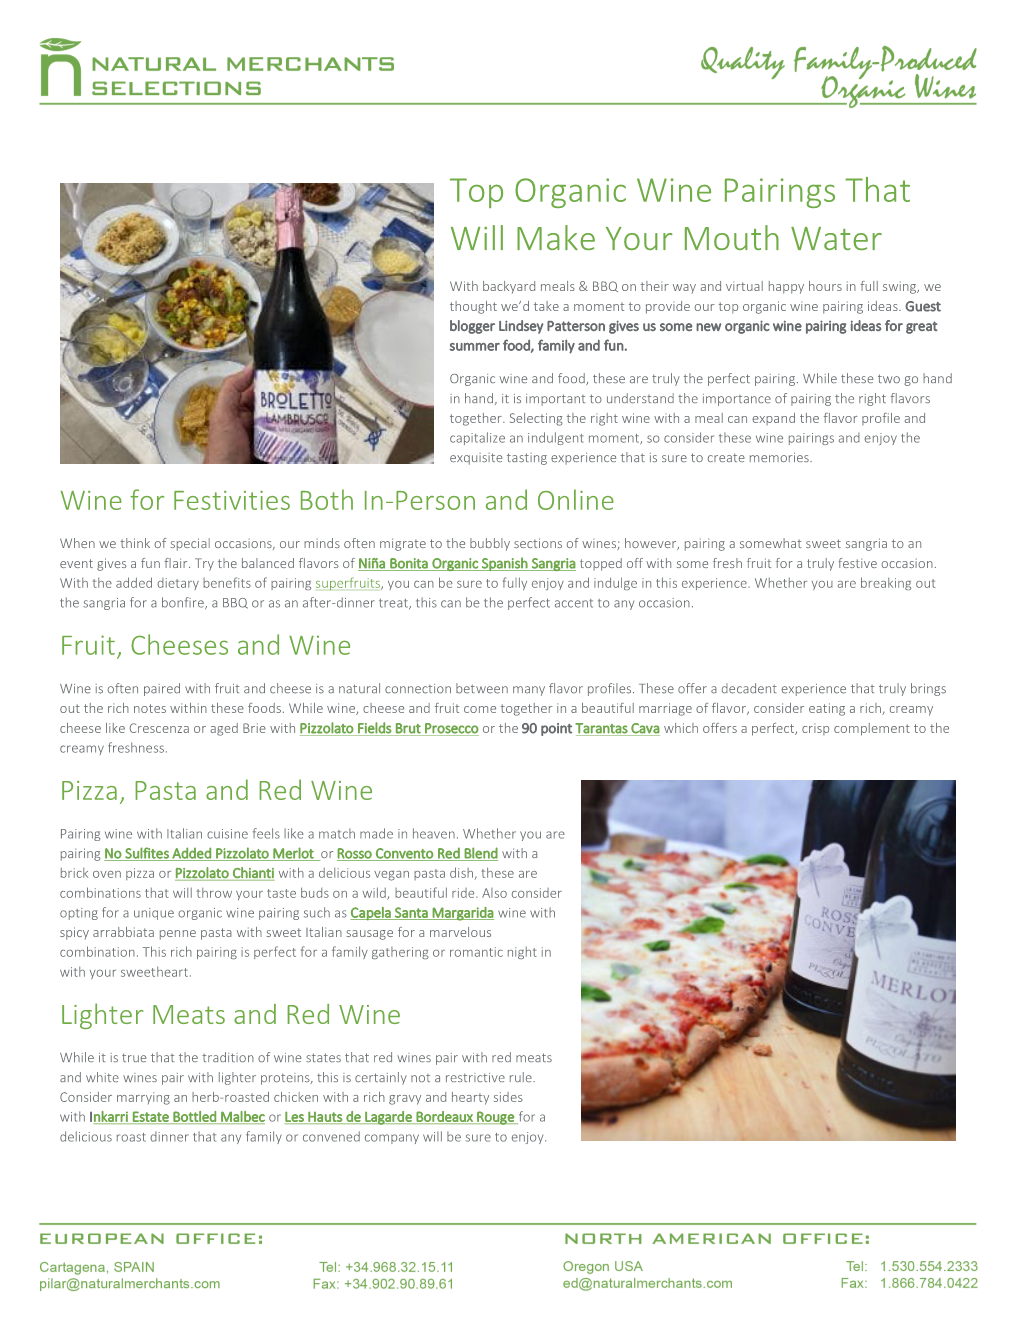 Top Organic Wine Pairings That Will Make Your Mouth Water